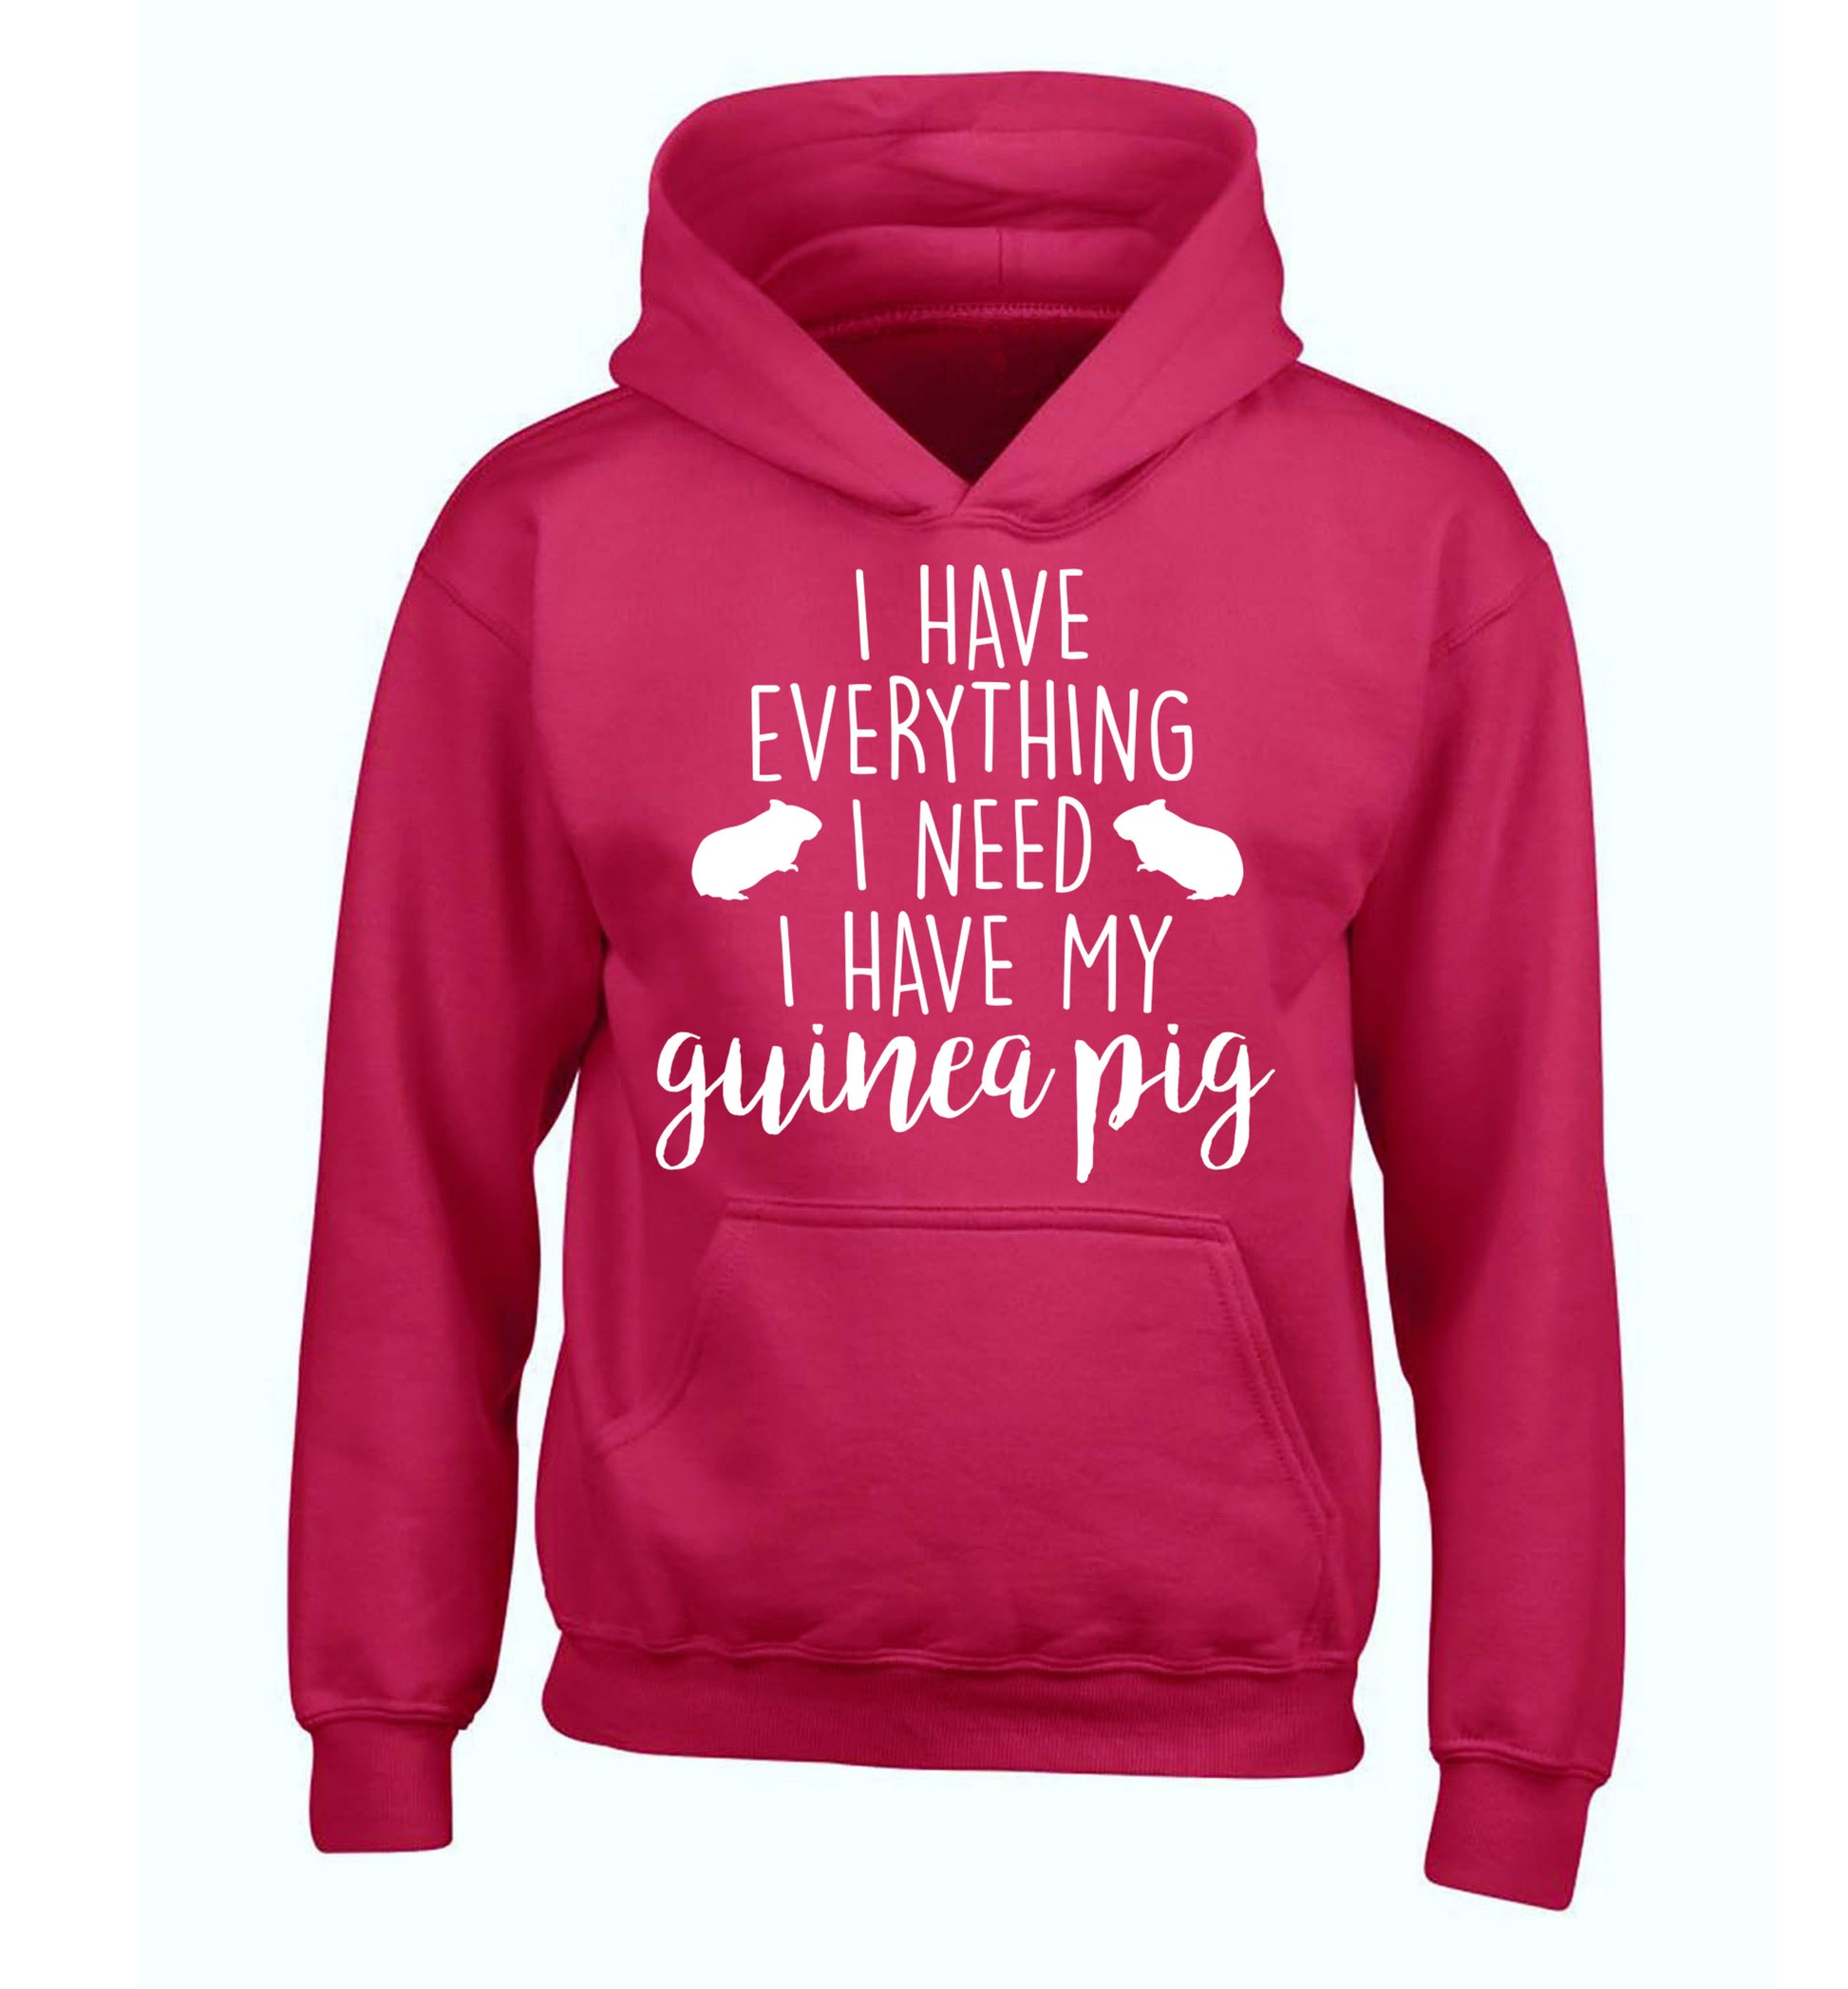 I have everything I need, I have my guinea pig children's pink hoodie 12-14 Years